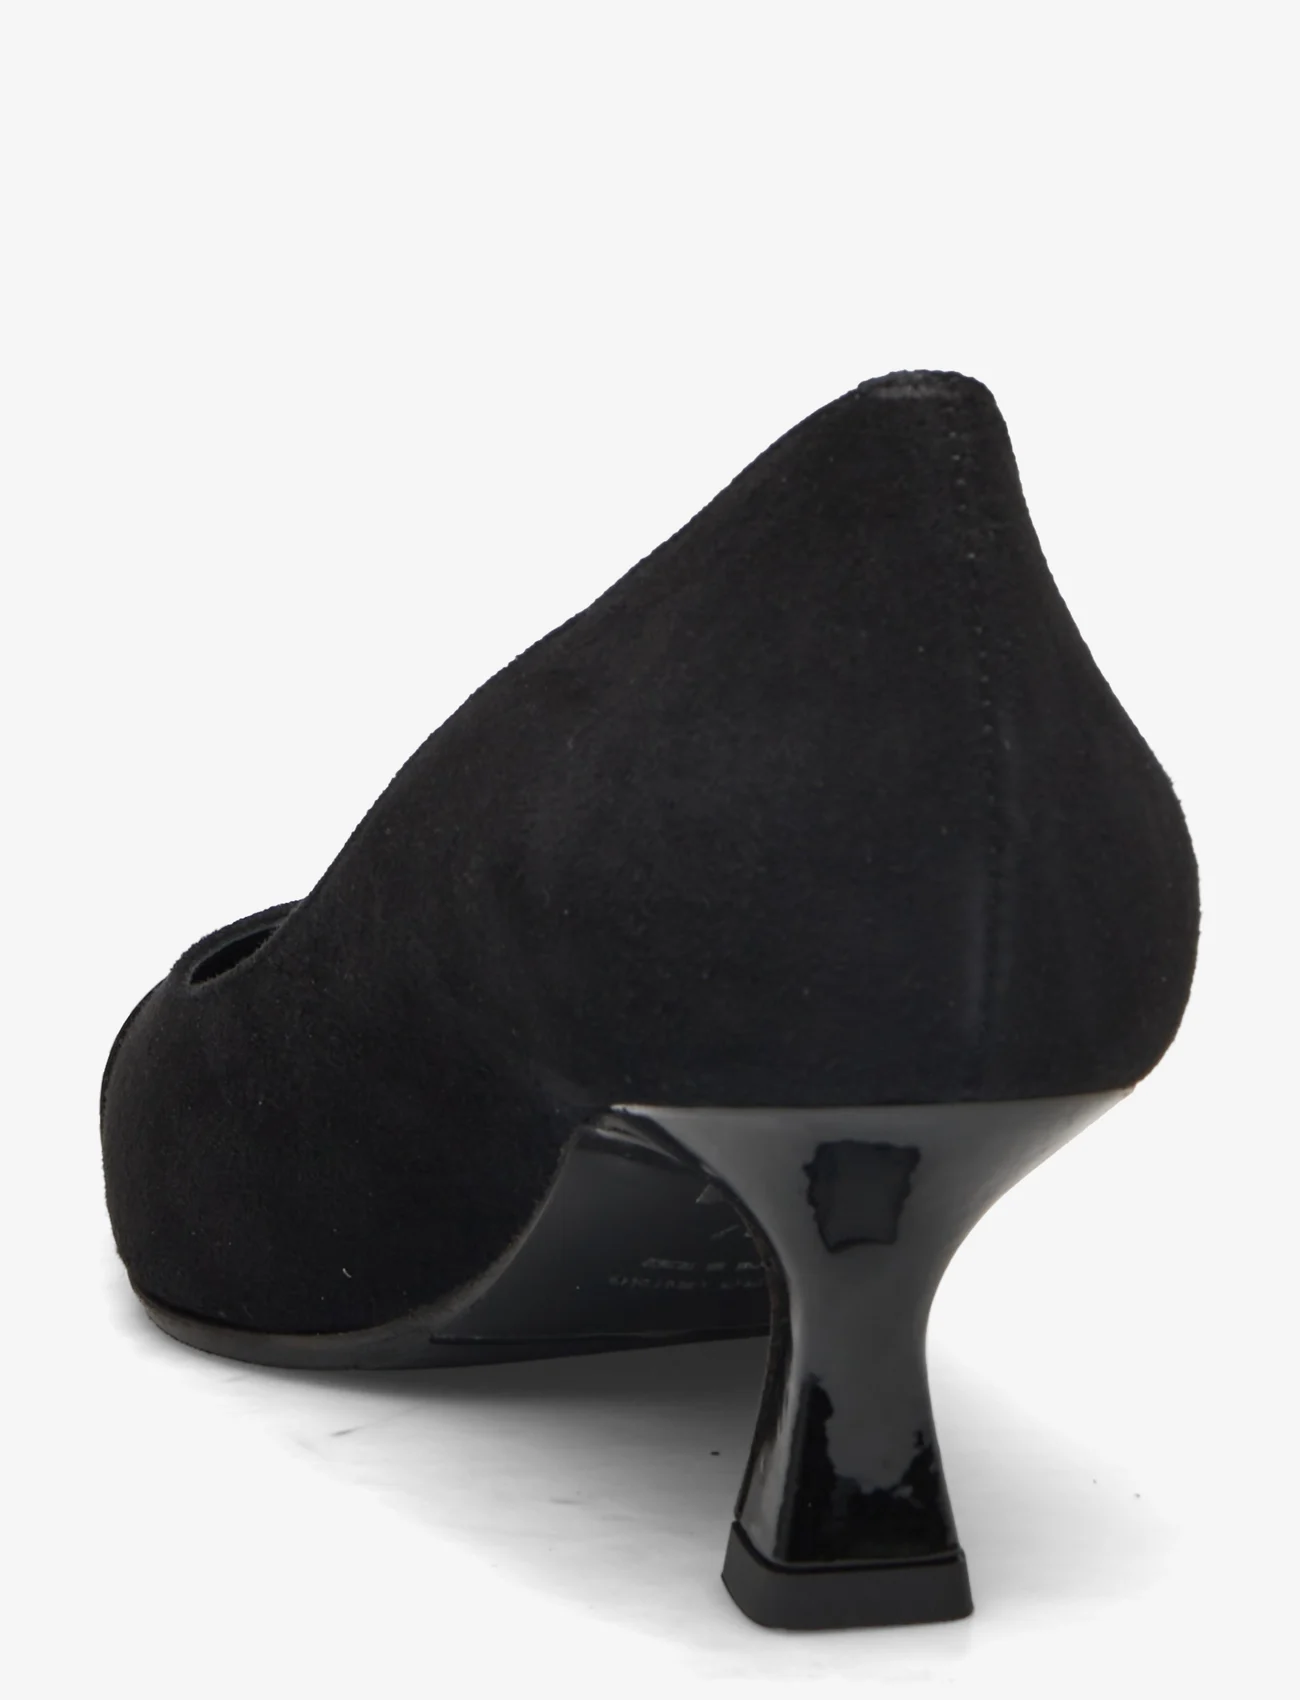 Apair - Tip low pump - party wear at outlet prices - nero - 1